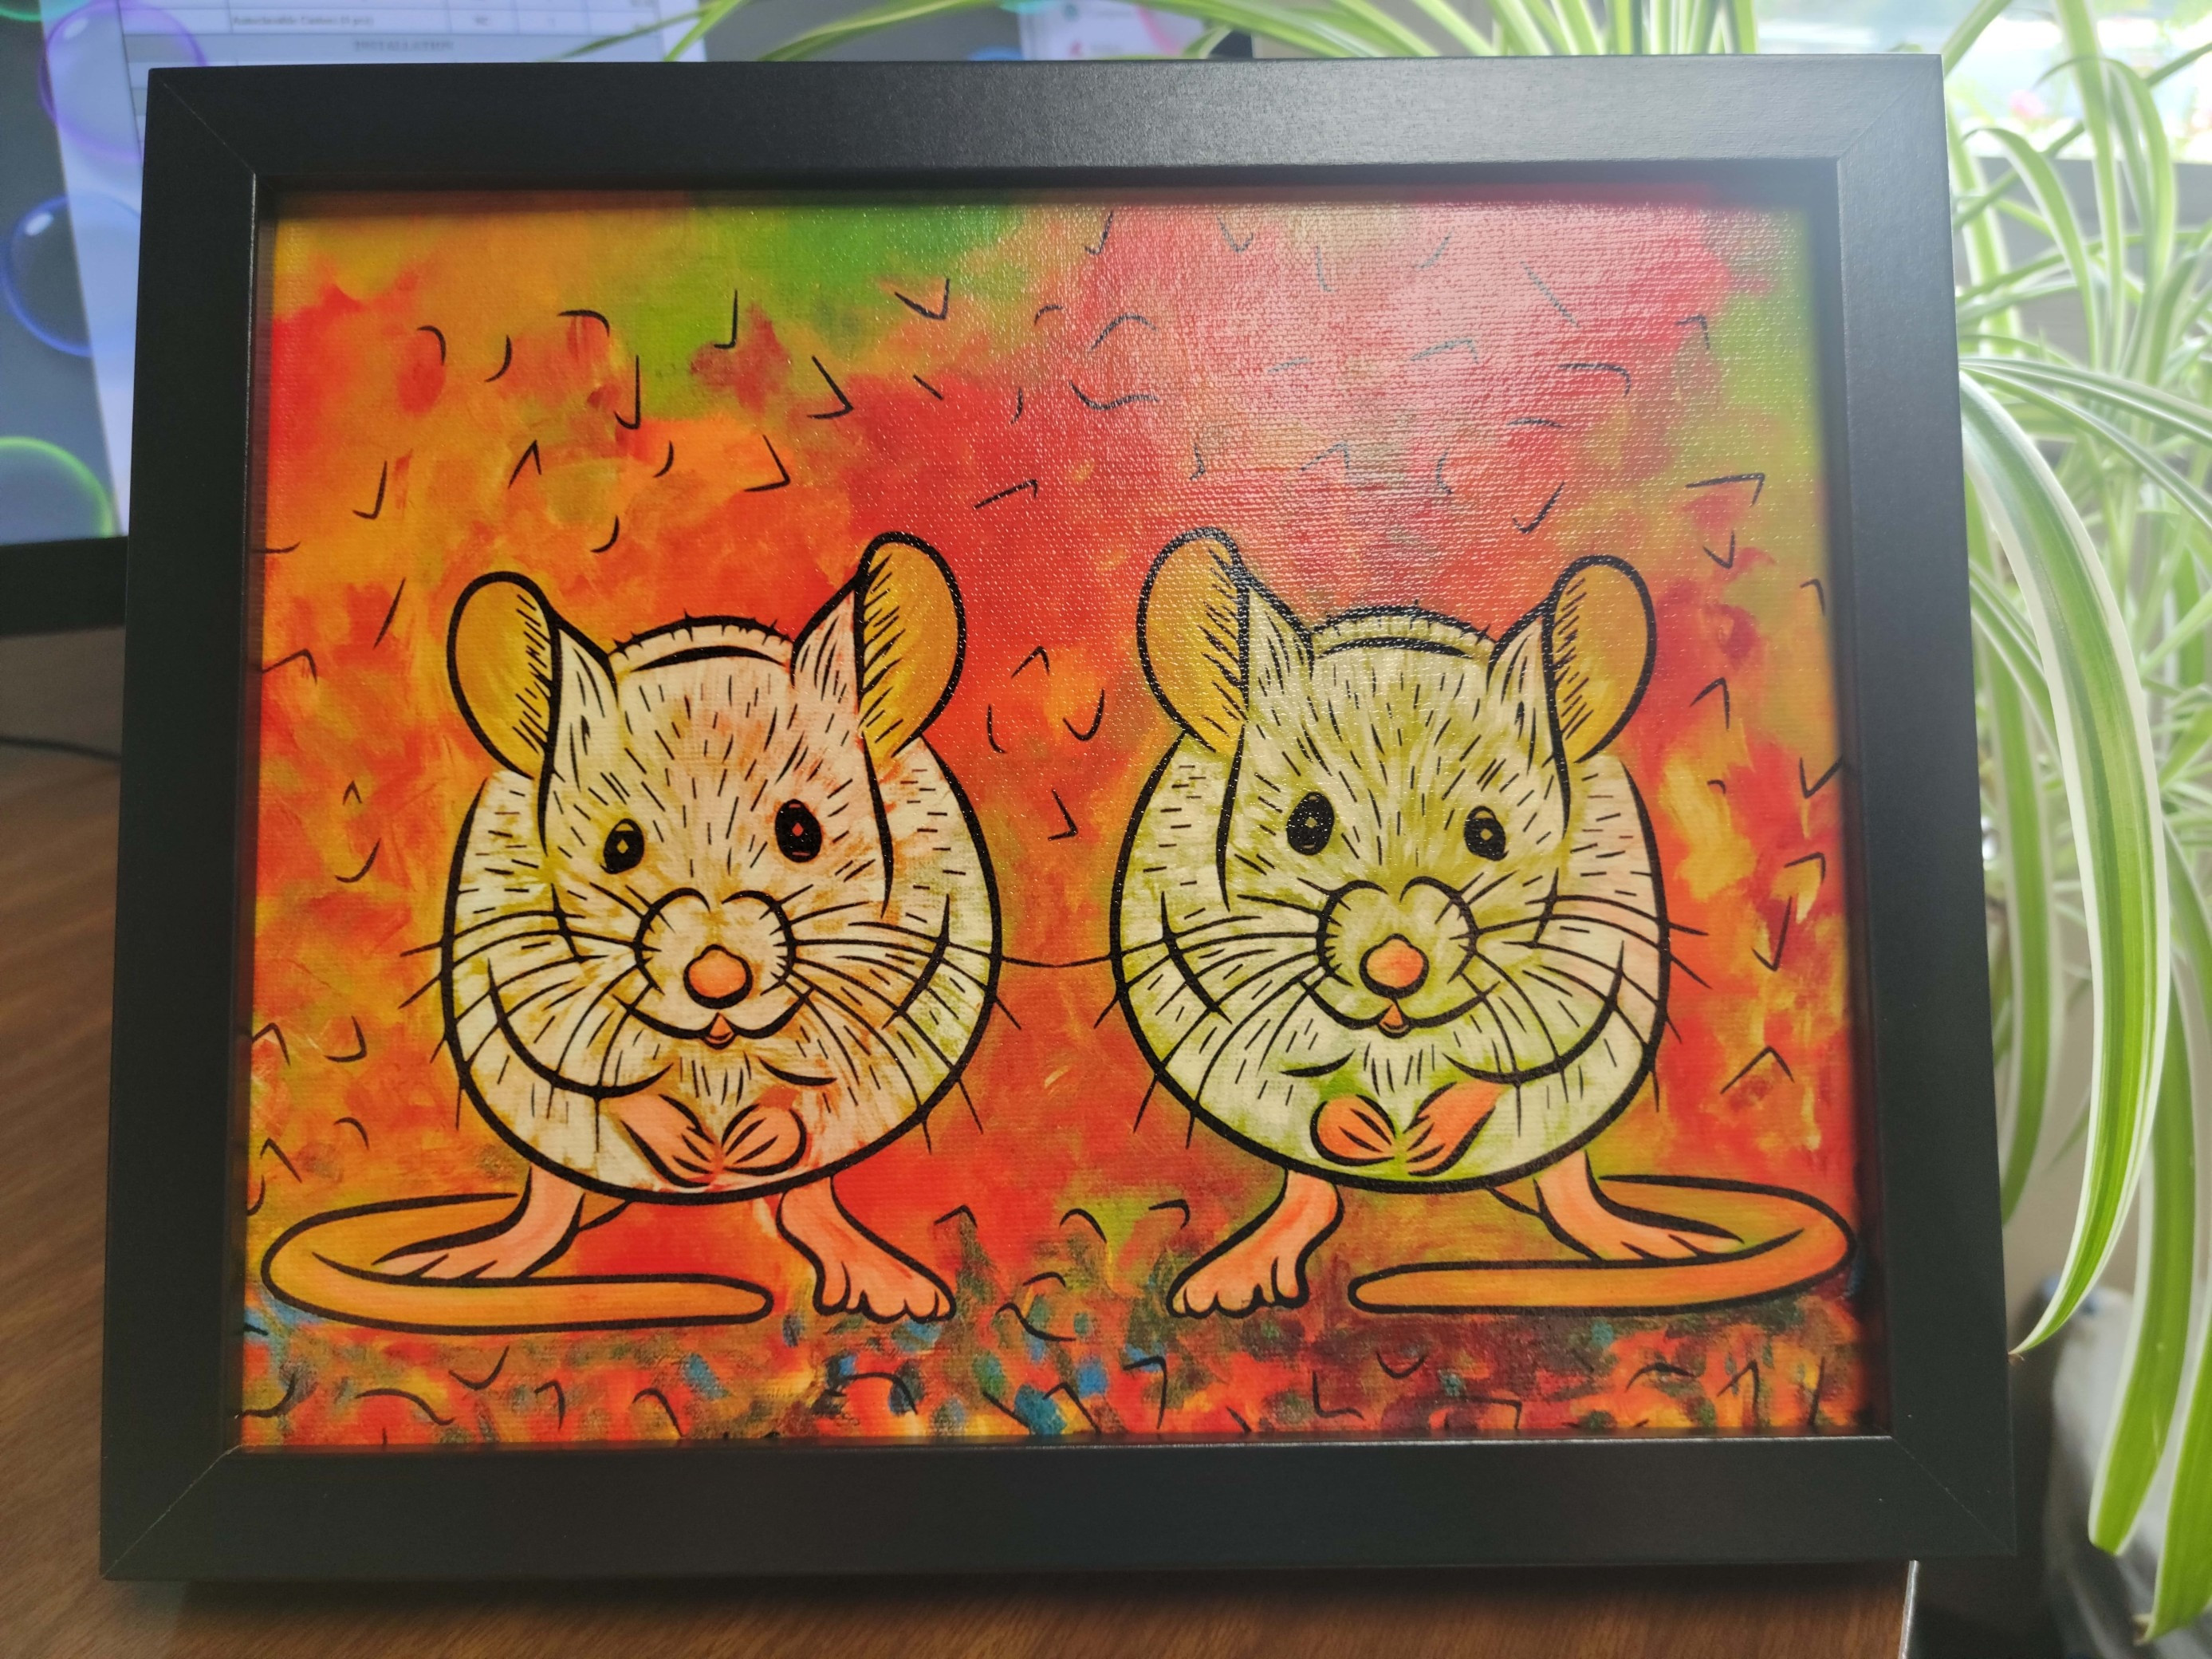 Art print on canvas of 2 mice. Entitled "Squeak Squeak". An original commission of Joel Taylor, DC based artist. 11" x 9"